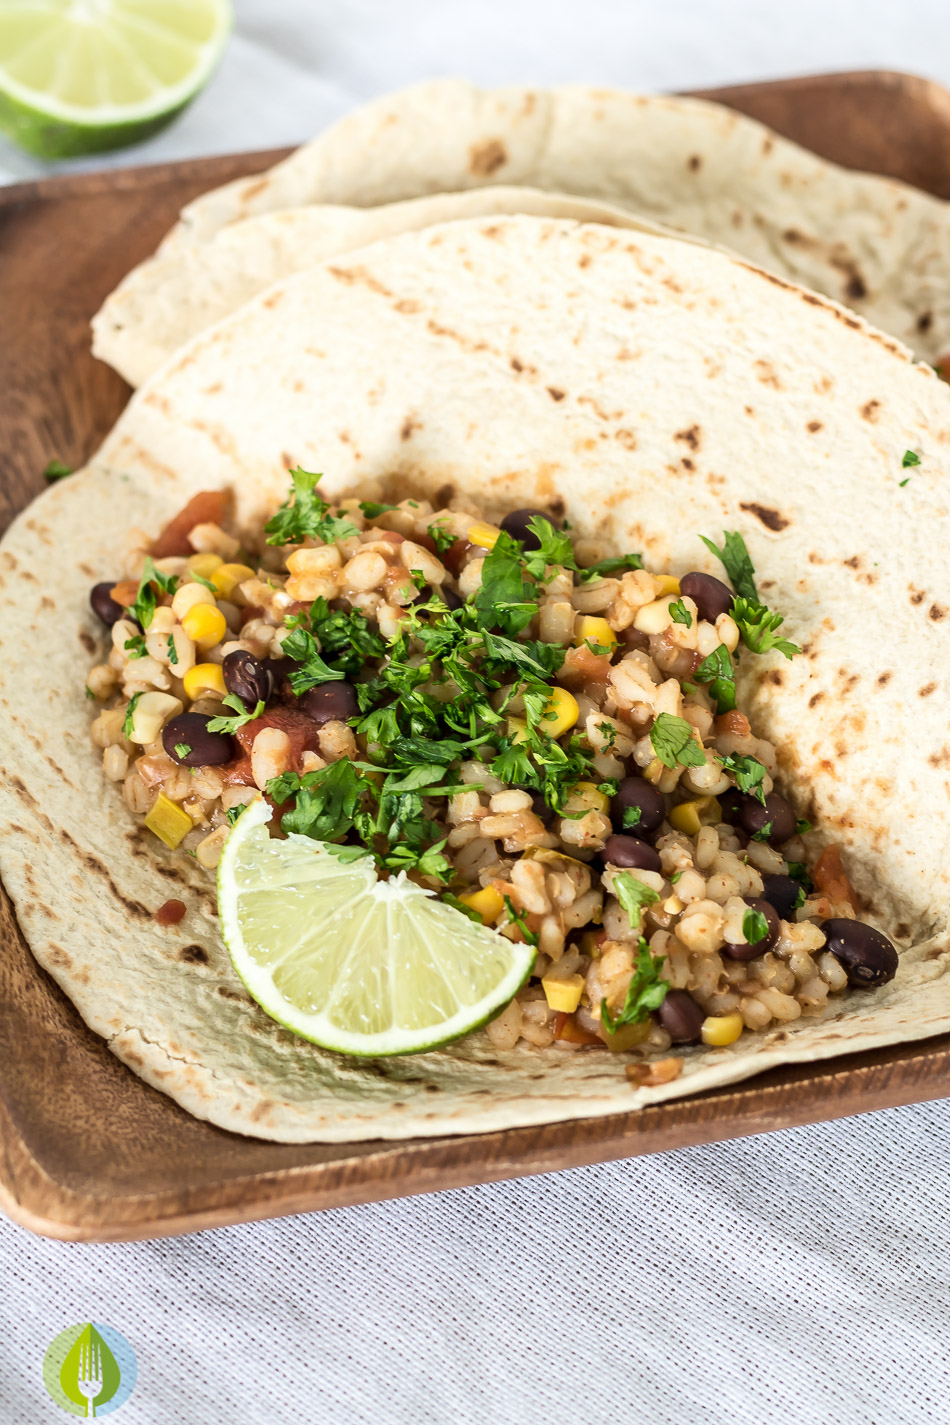 soft taco shell filled with vegan black bean and barley filling